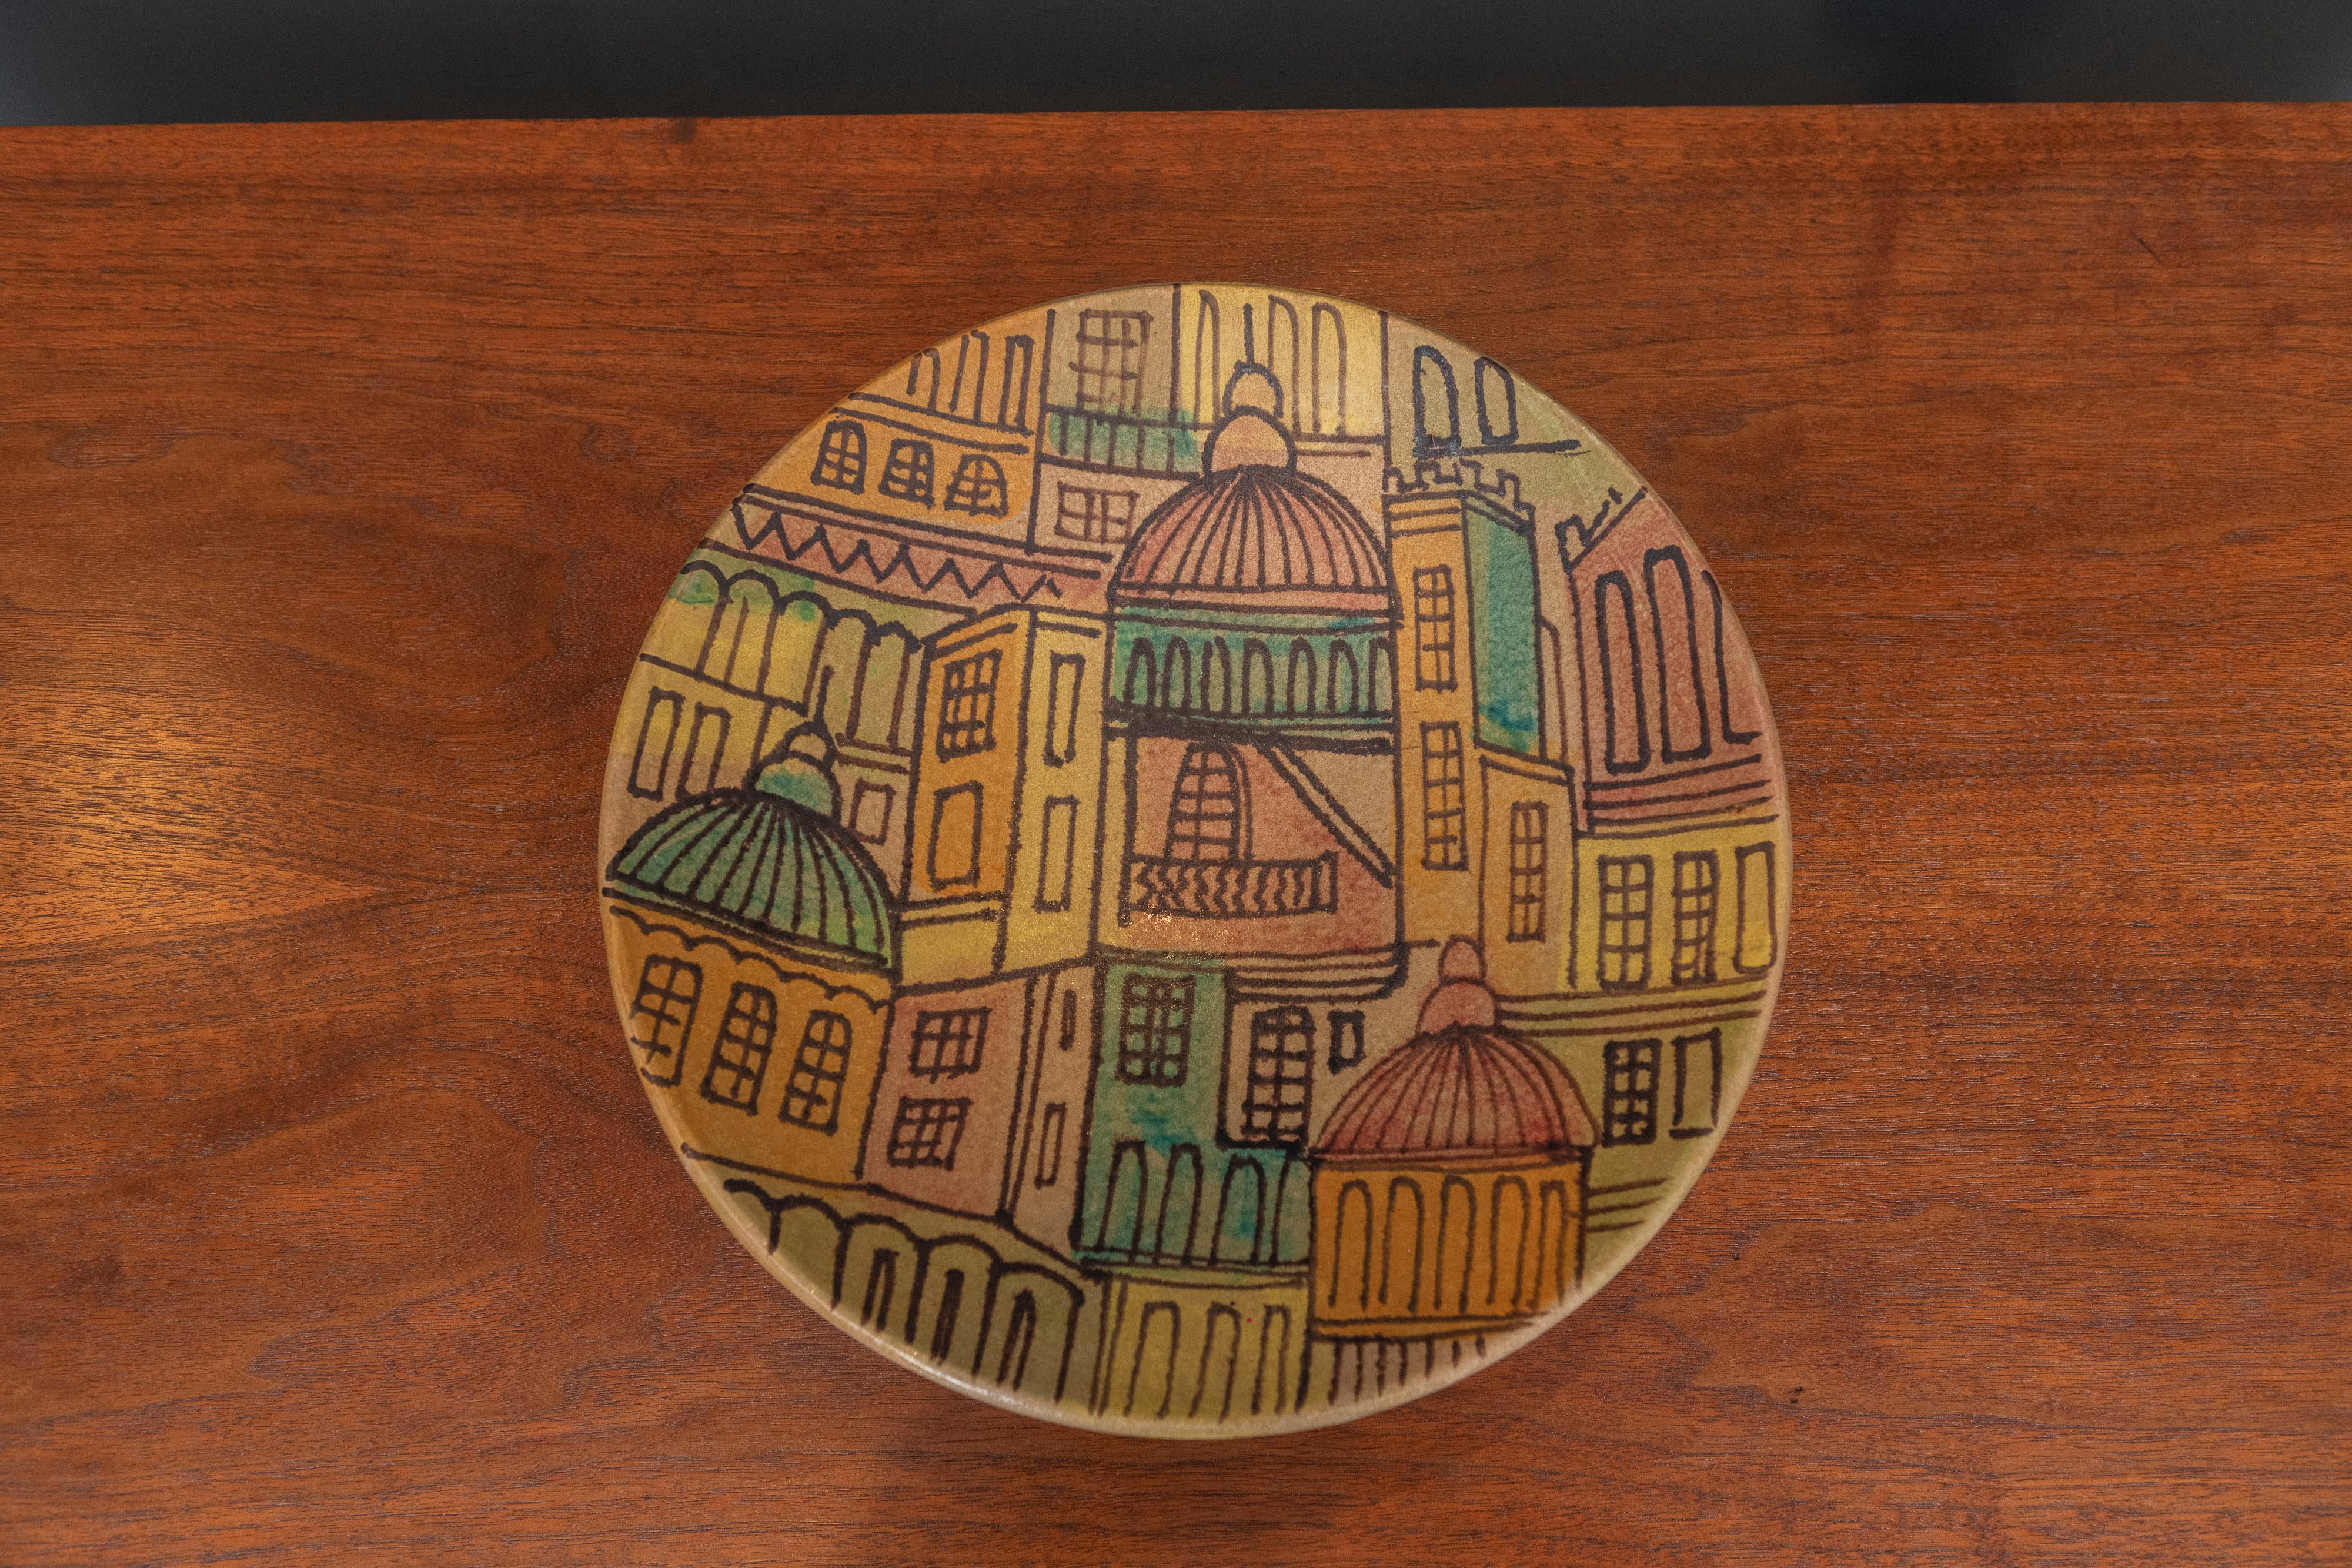 Aldo Londi design decorative ceramic centerpiece bowl for Bitossi, Italy. 
Fun scene depicting rooftops of Rome, Italy? Well executed and in very good original condition free of chips, cracks or stains.